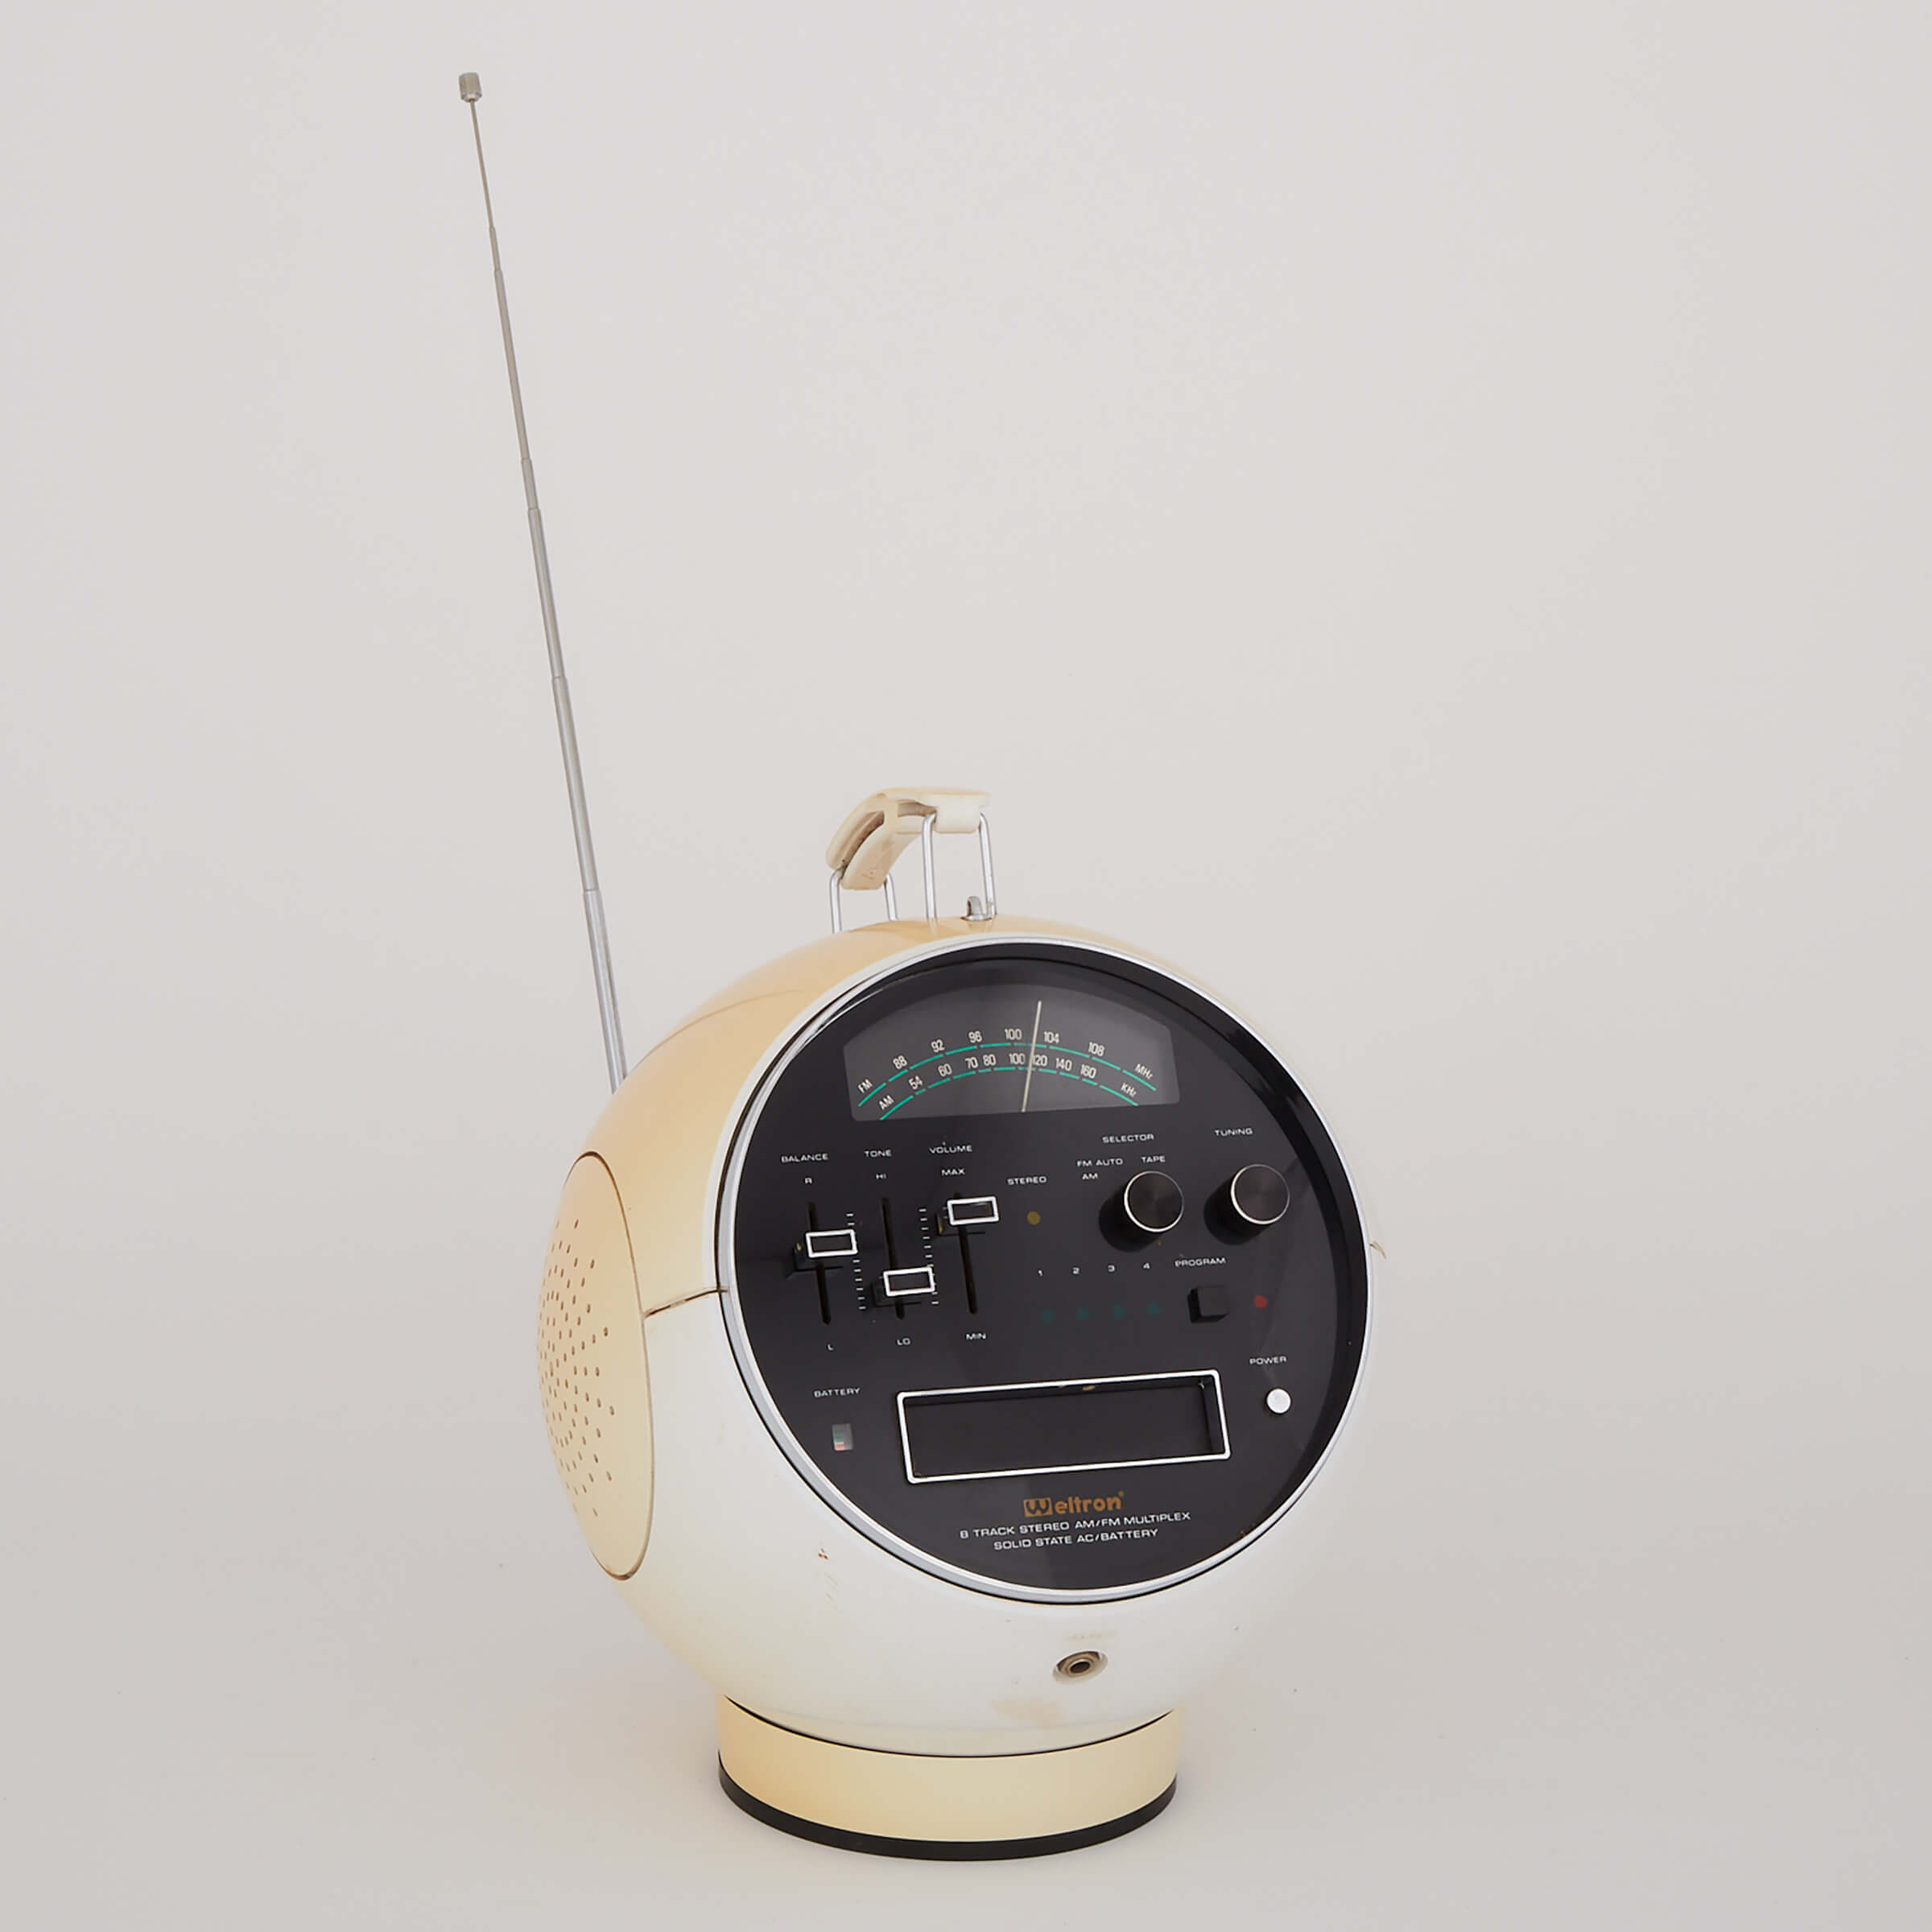 Weltron Prinz Sound SM8 ‘Space Ball’ AM/FM Radio and 8-Track Stereo Cassette Player, c.1970